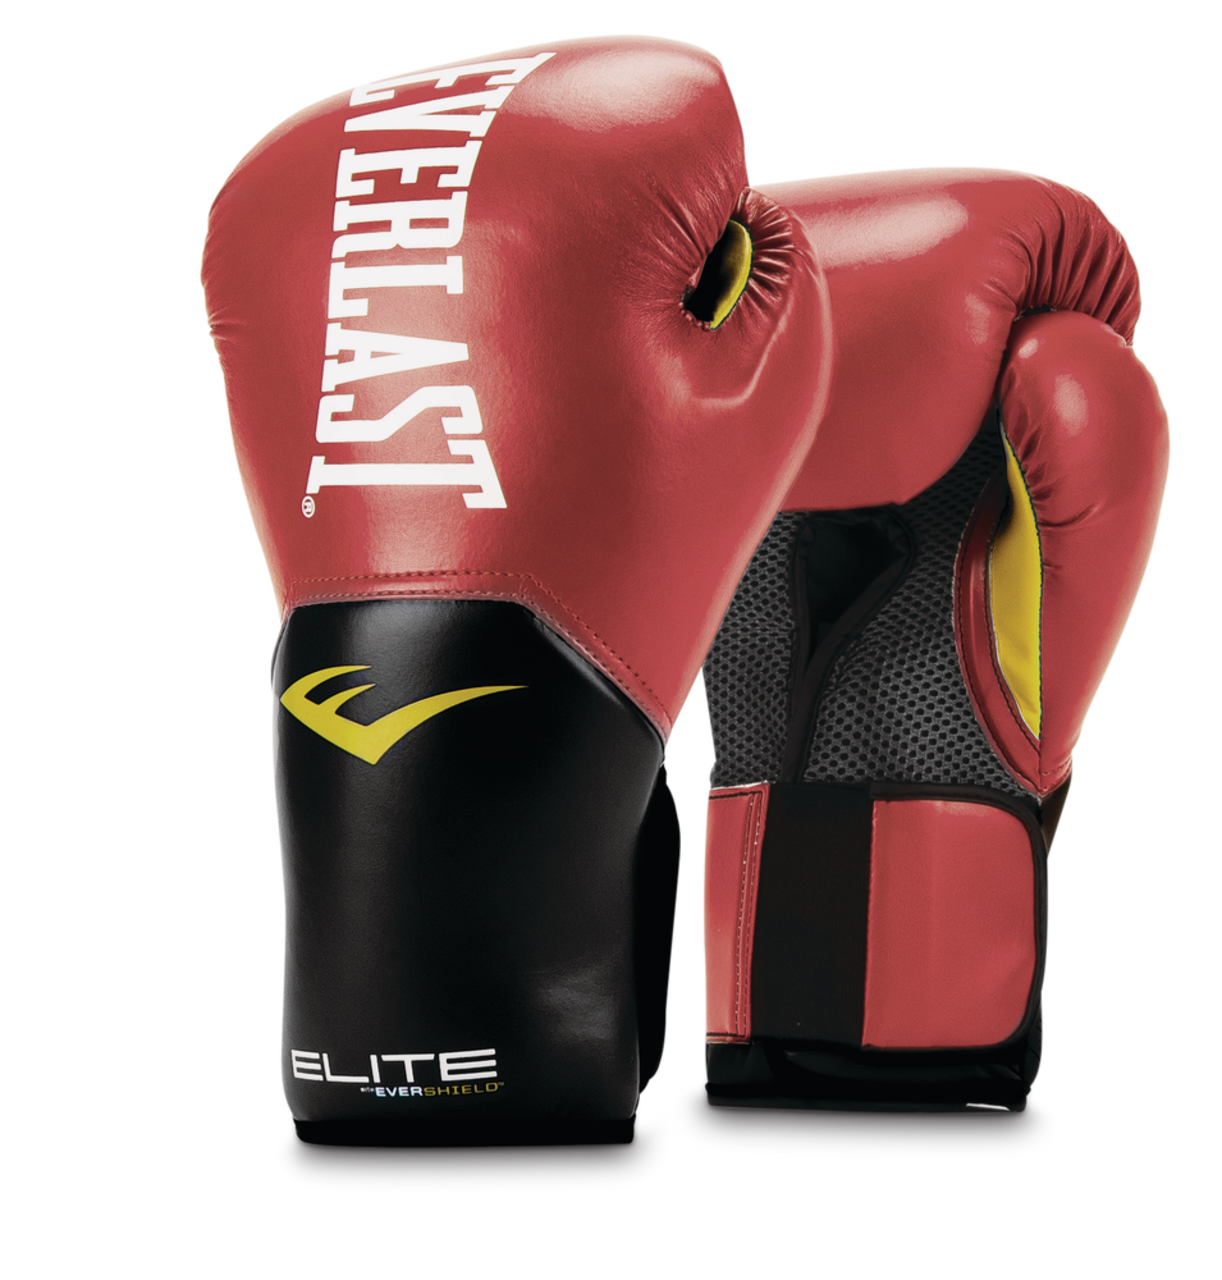 https://media-www.canadiantire.ca/product/playing/exercise/exercise-accessories/1841021/everlast-elite-2-0-gloves-red-14oz-ce23d820-40cf-4370-8f97-4e56786e2044.png?imdensity=1&imwidth=640&impolicy=mZoom